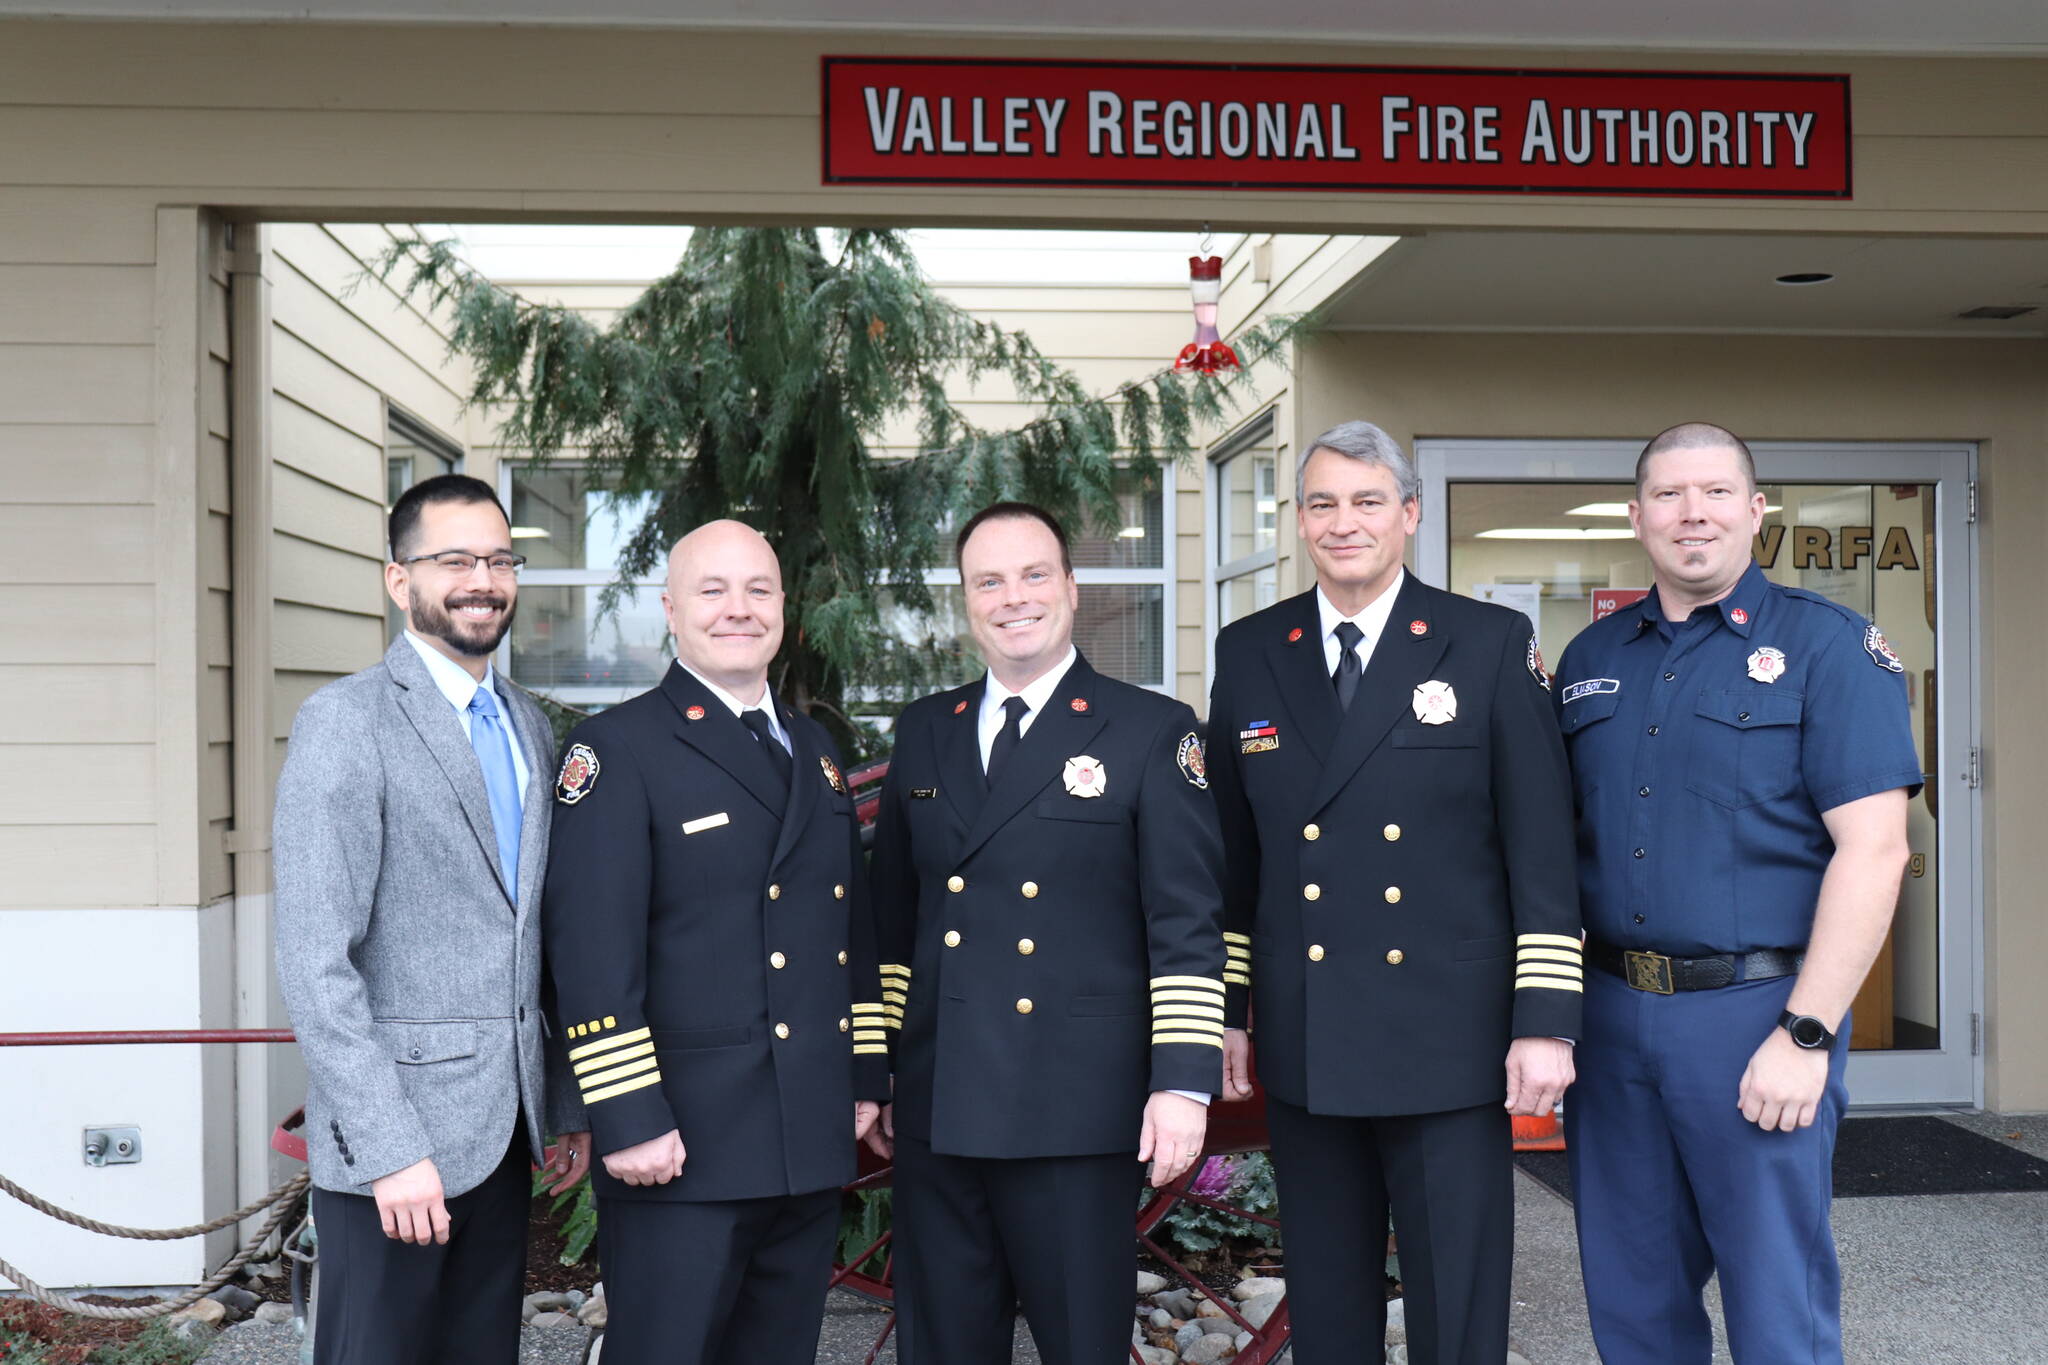 (Left to right) Data analyst Noah Chang, Deputy Chief Rick Olson, Fire Chief Brad Thompson, Deputy Chief Dave Larberg and Captain Tyler Eliason pose for a photo after receiving accreditation on Wednesday, Dec. 15, 2021. Photo courtesy of Valley Regional Fire Authority.